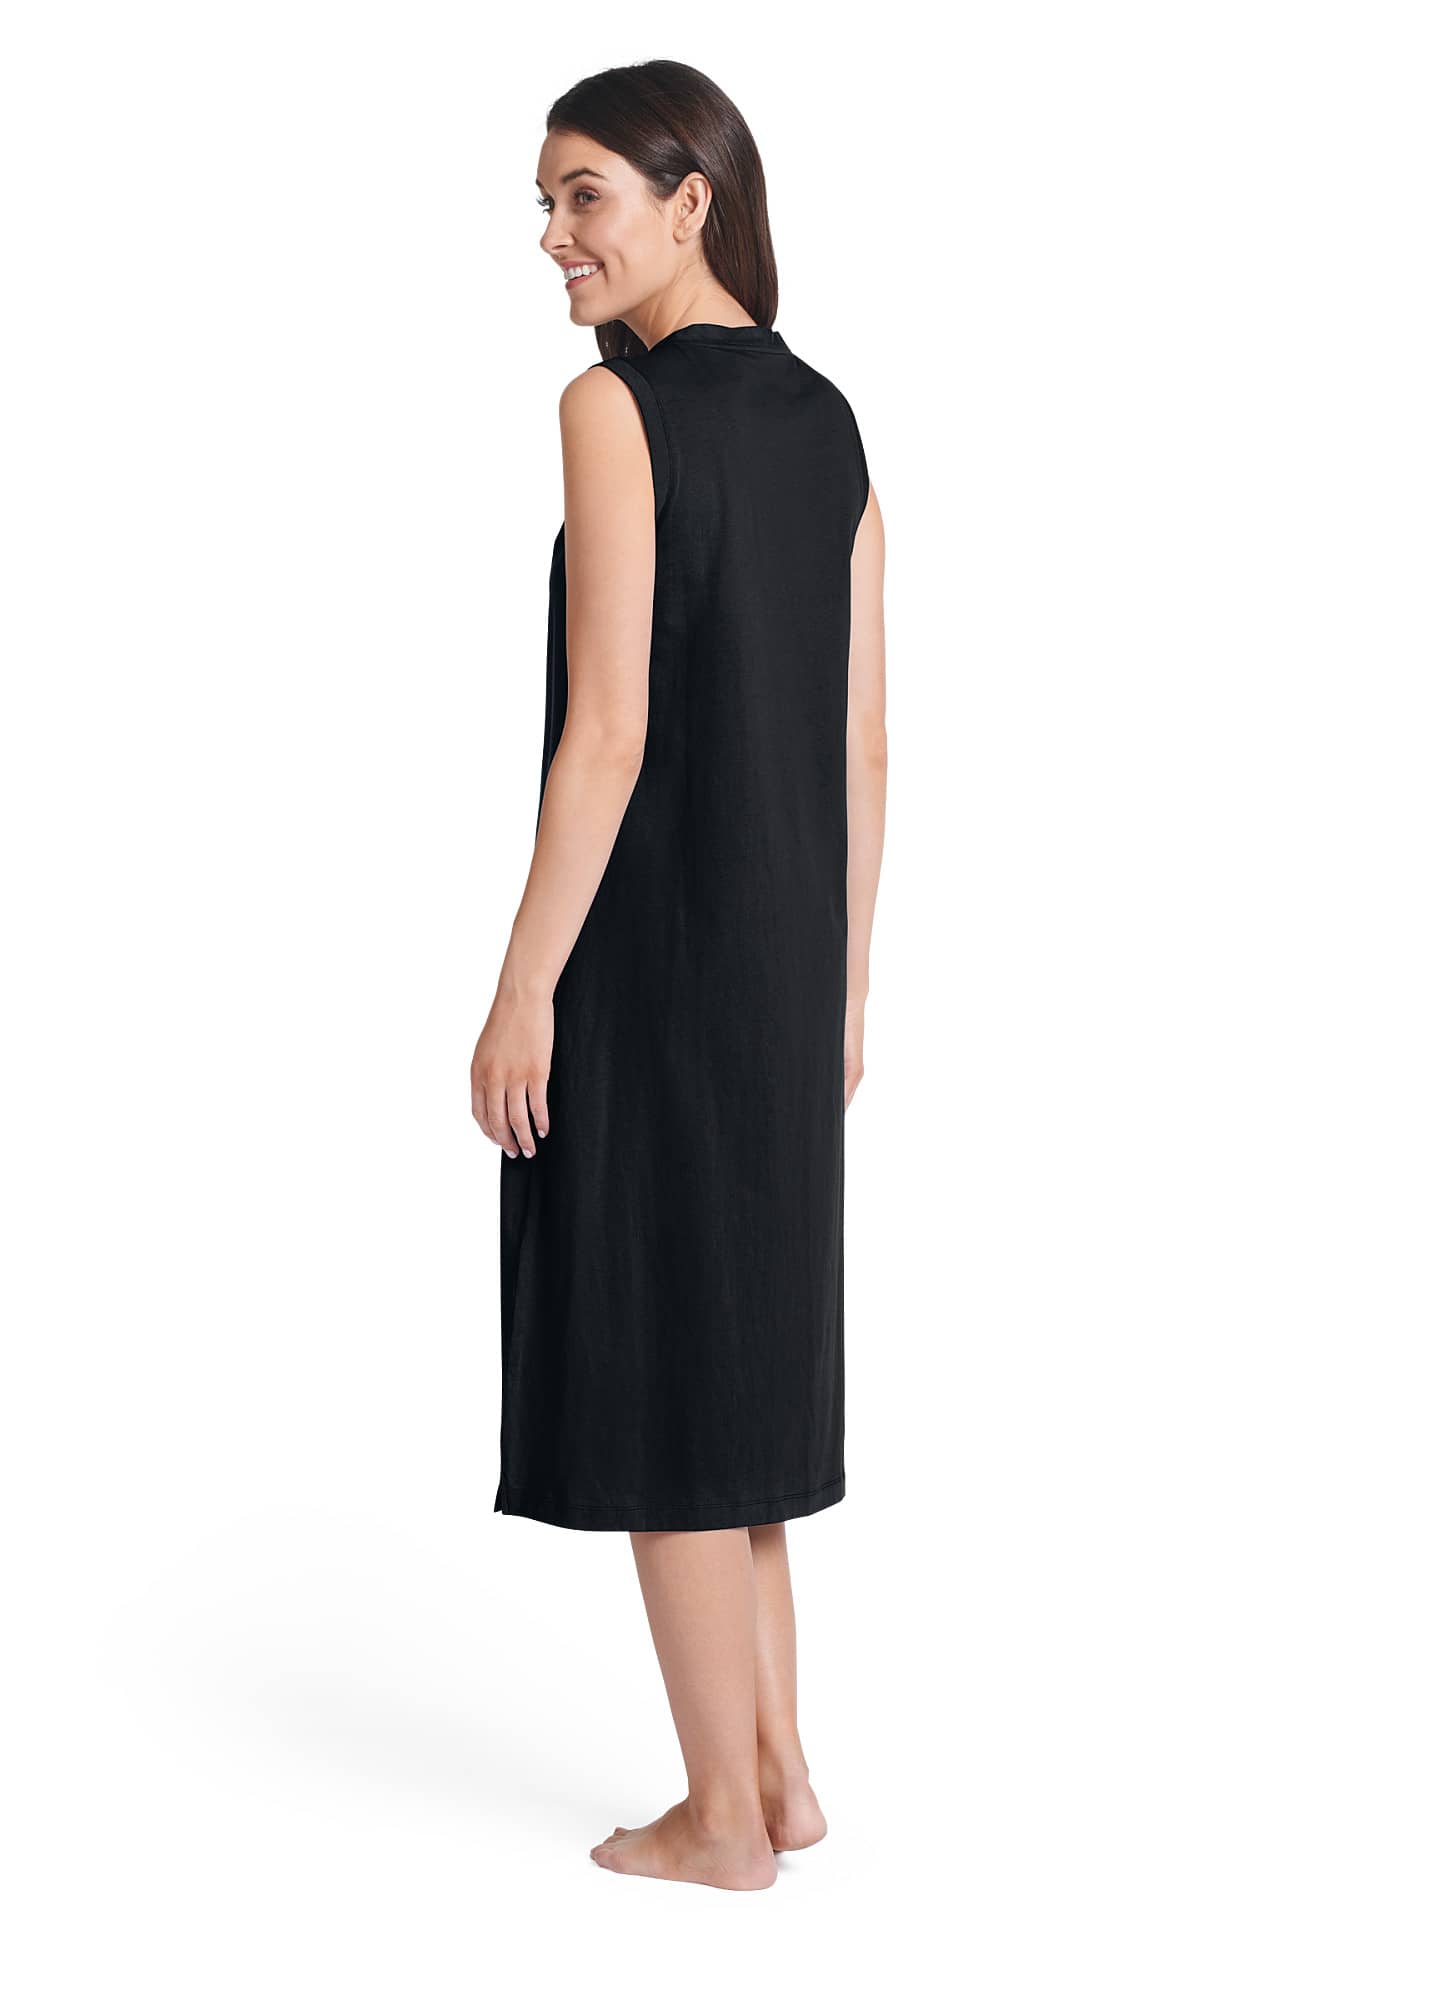 Women's Casual Cotton Tank Sleep Dress with Built-in-Bra Soft Comfy Solid  Sleeveless Sleepwear Bedroom or Go Out Black : : Sports & Outdoors